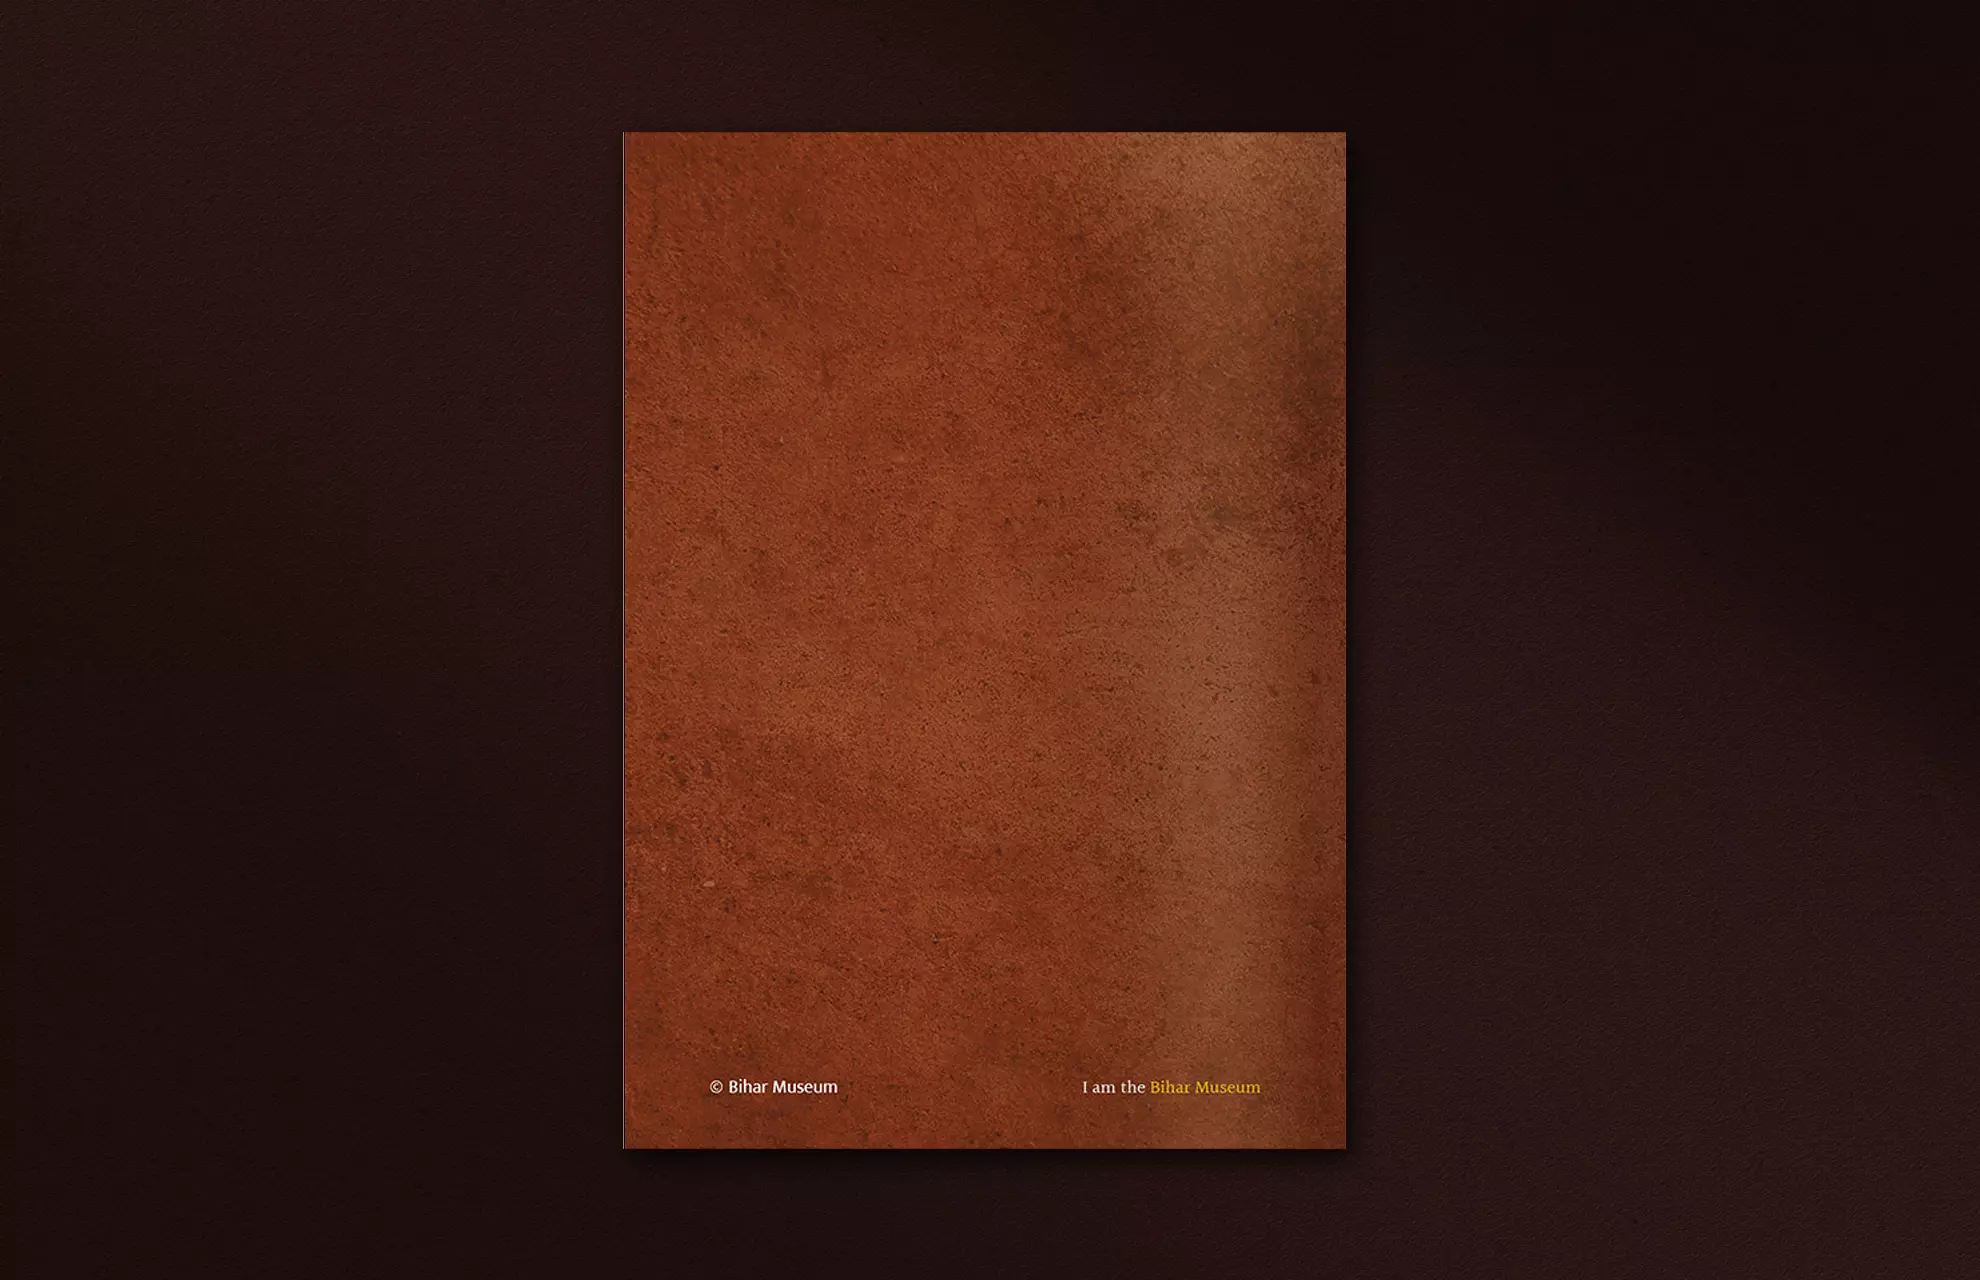 Visual and booklet design for Bihar Museum